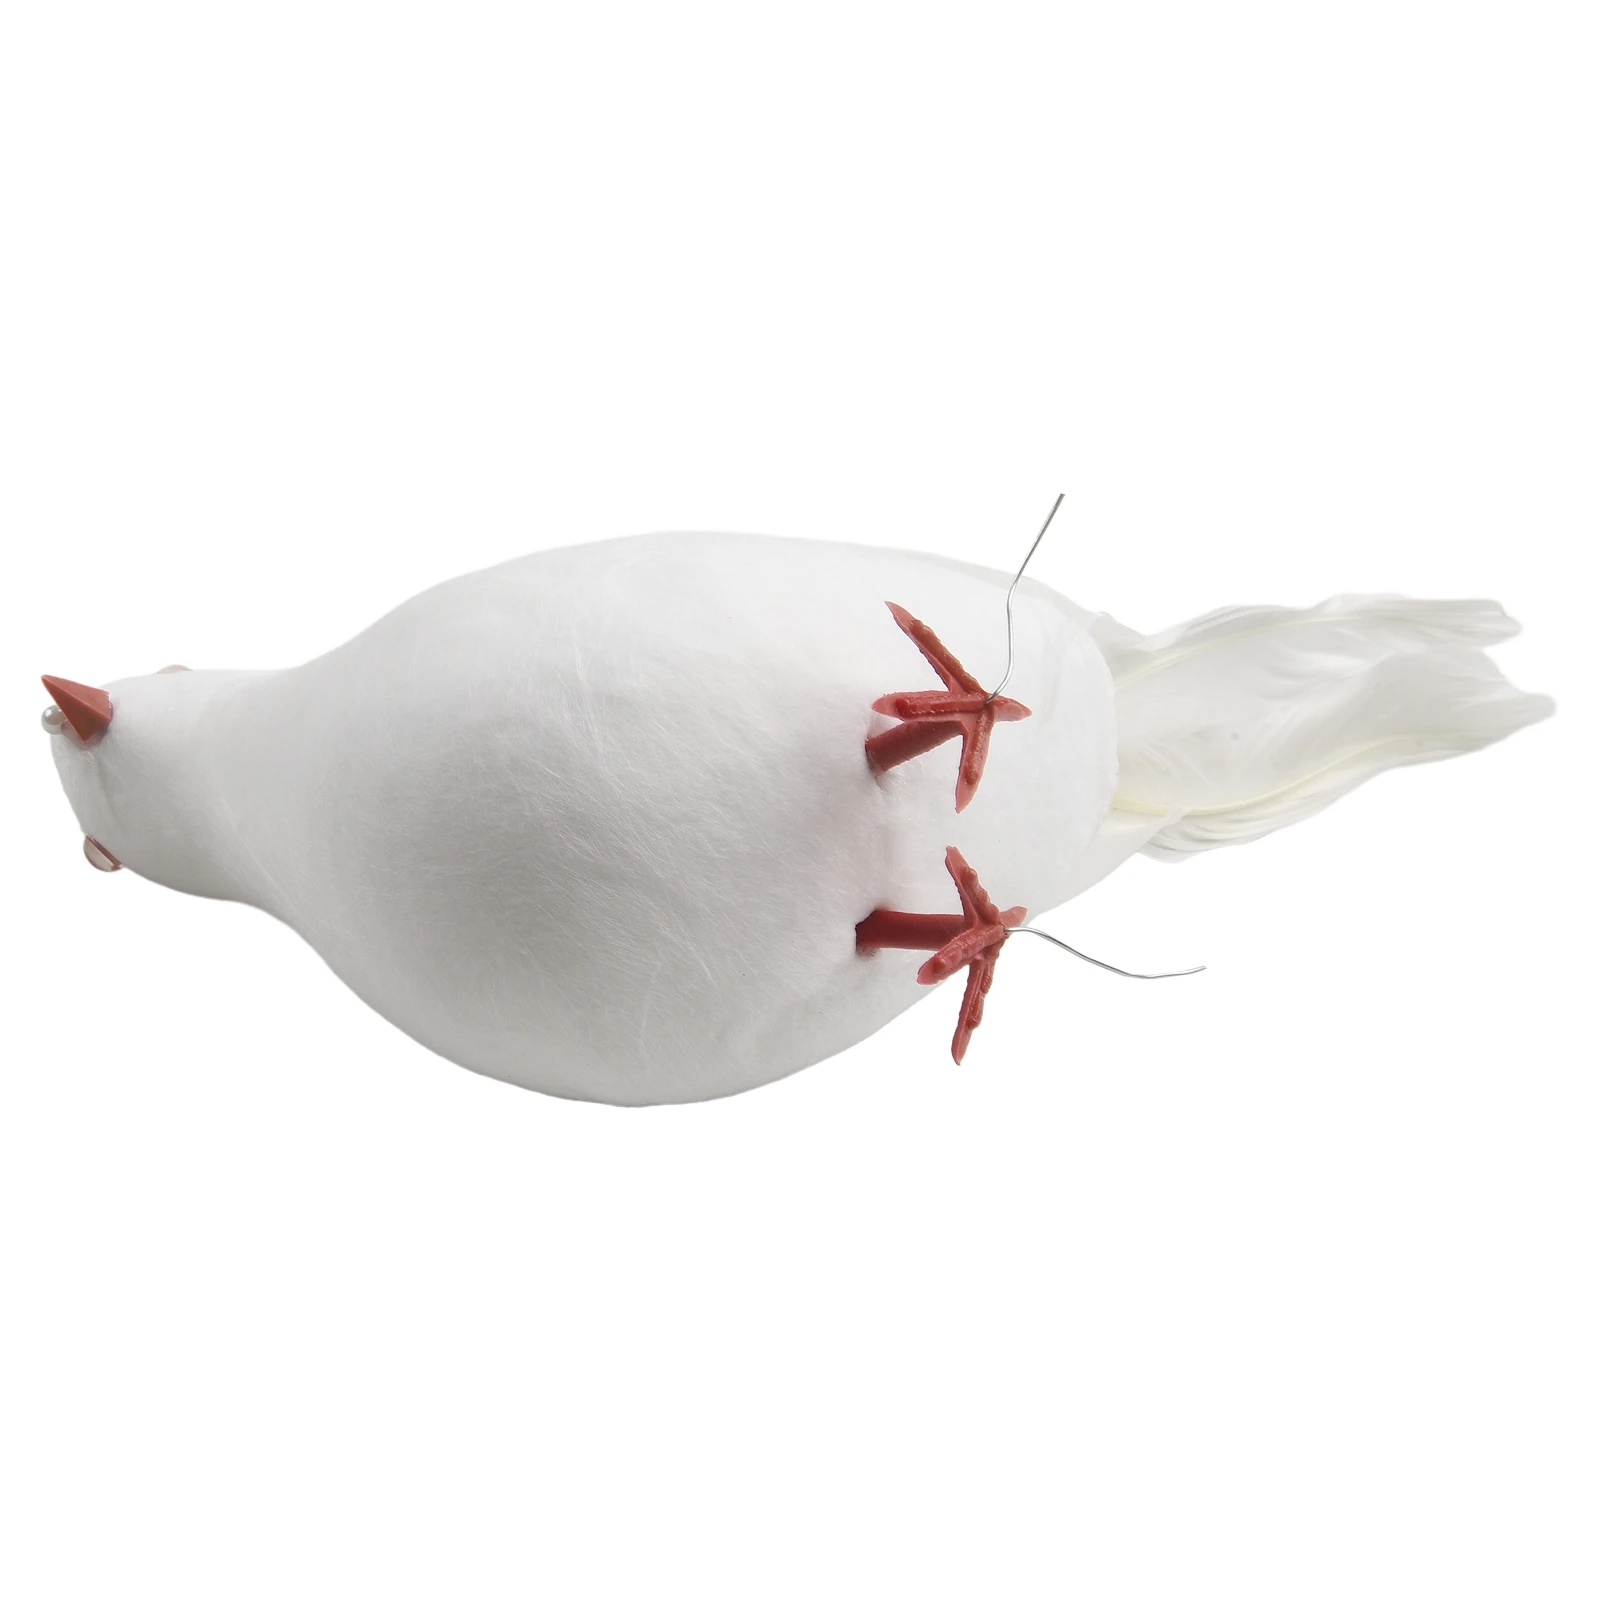 

Durable New Practical Home Simulated Birds Artificial Bird Specimen Educational Toys Flying Doves Birds Realistic